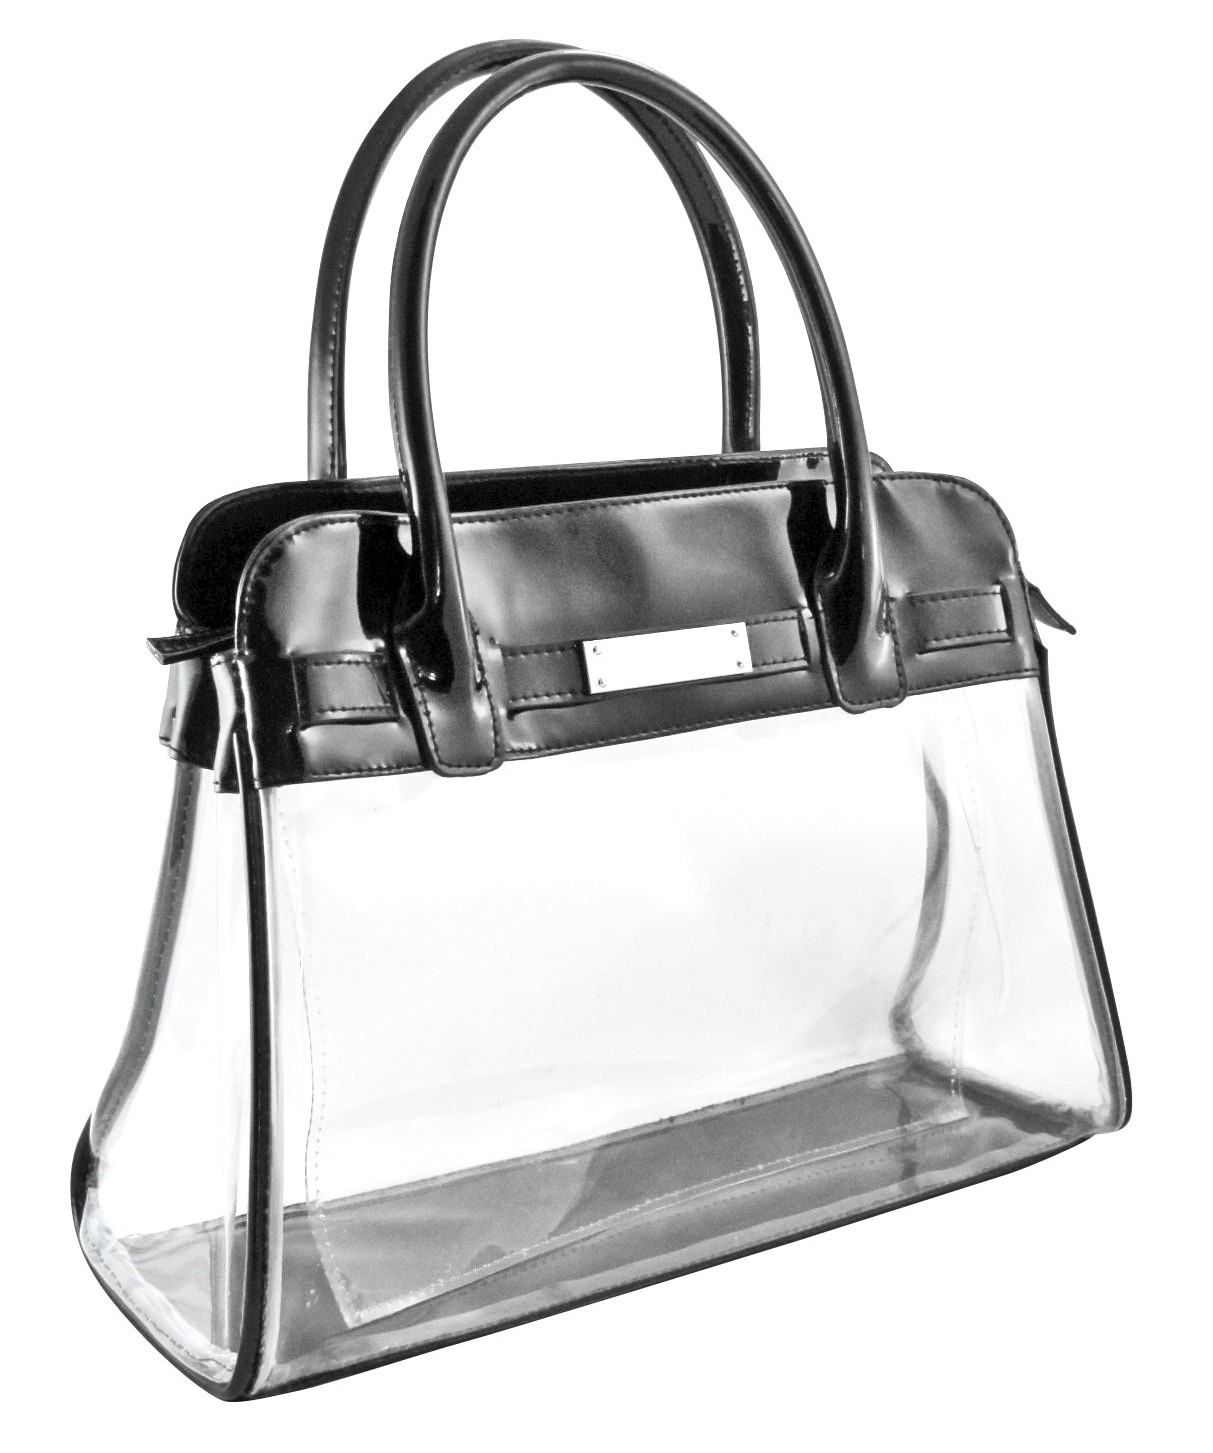 ... bag, one of many clear handbags offered on the Clear Handbags  More